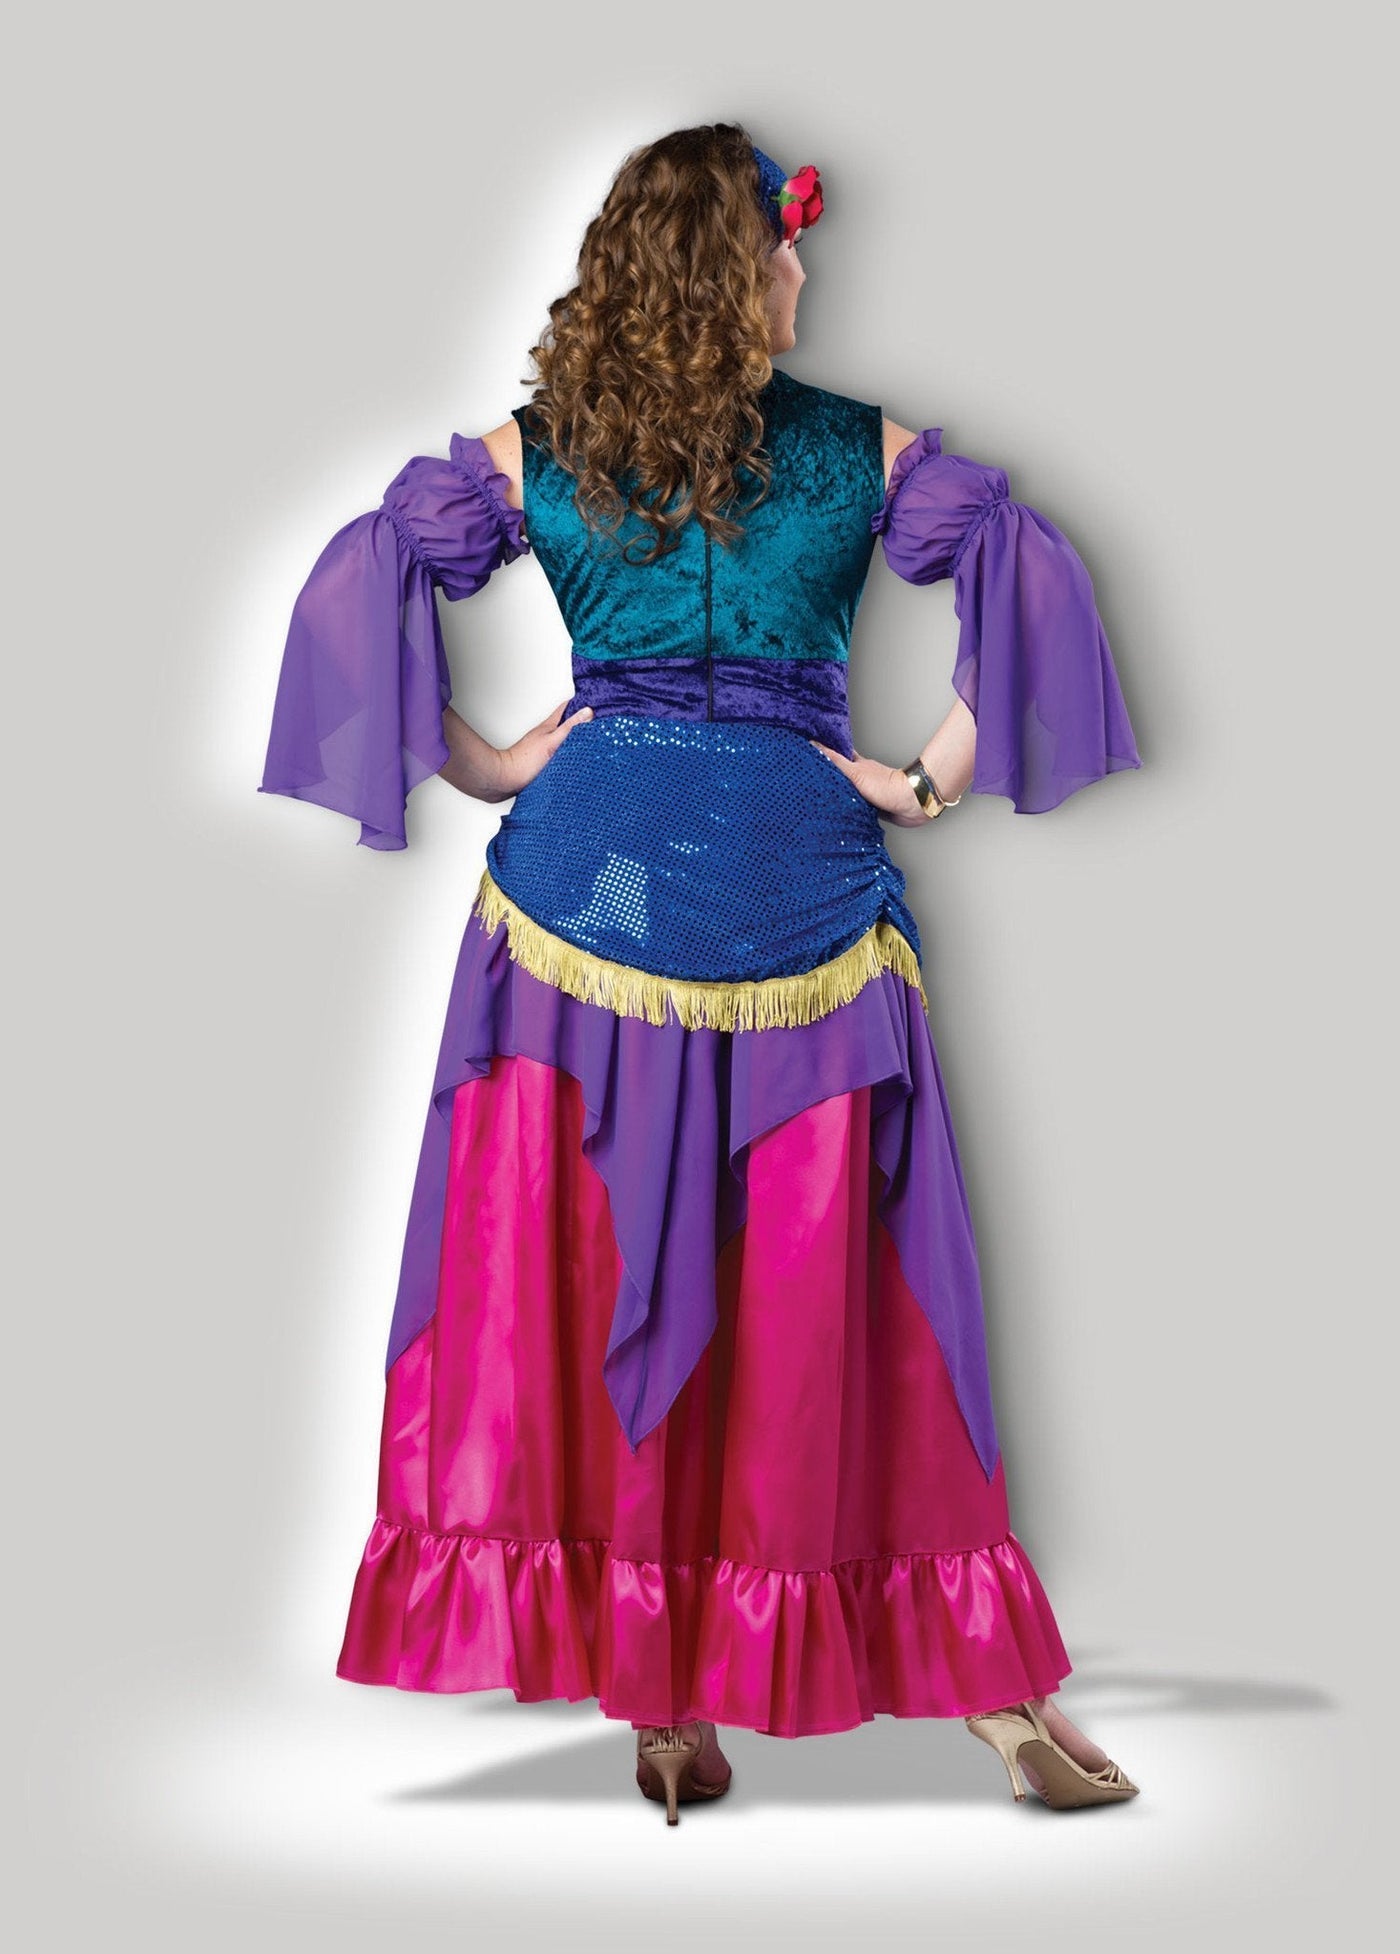 Deluxe Gypsy Treasure Plus Size Costume - JJ's Party House